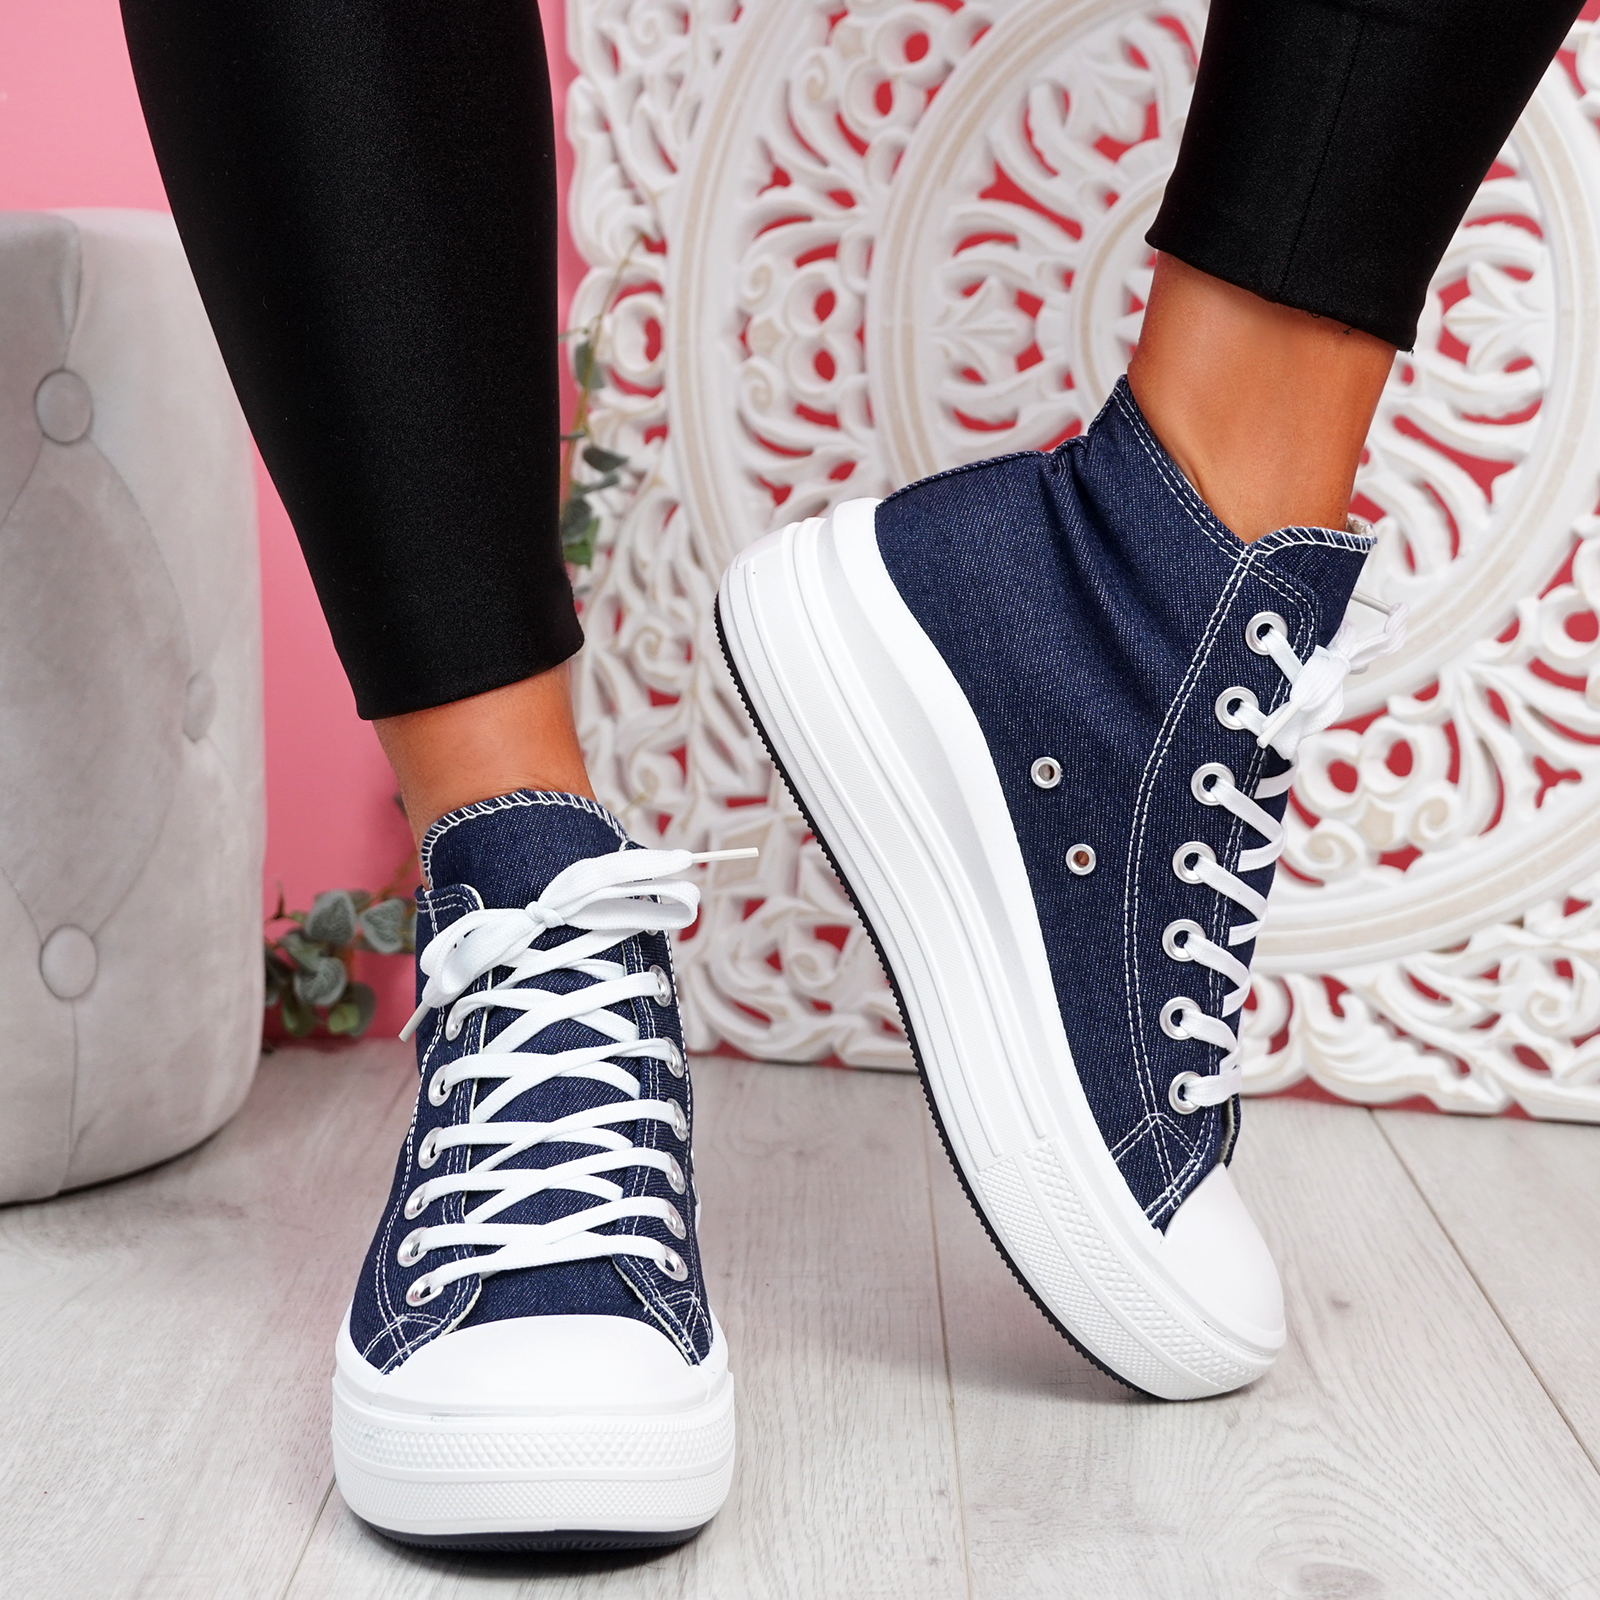 WOMENS LADIES PLATFORM FLATFORM TRAINERS LACE UP HIGH TOP SNEAKERS ...